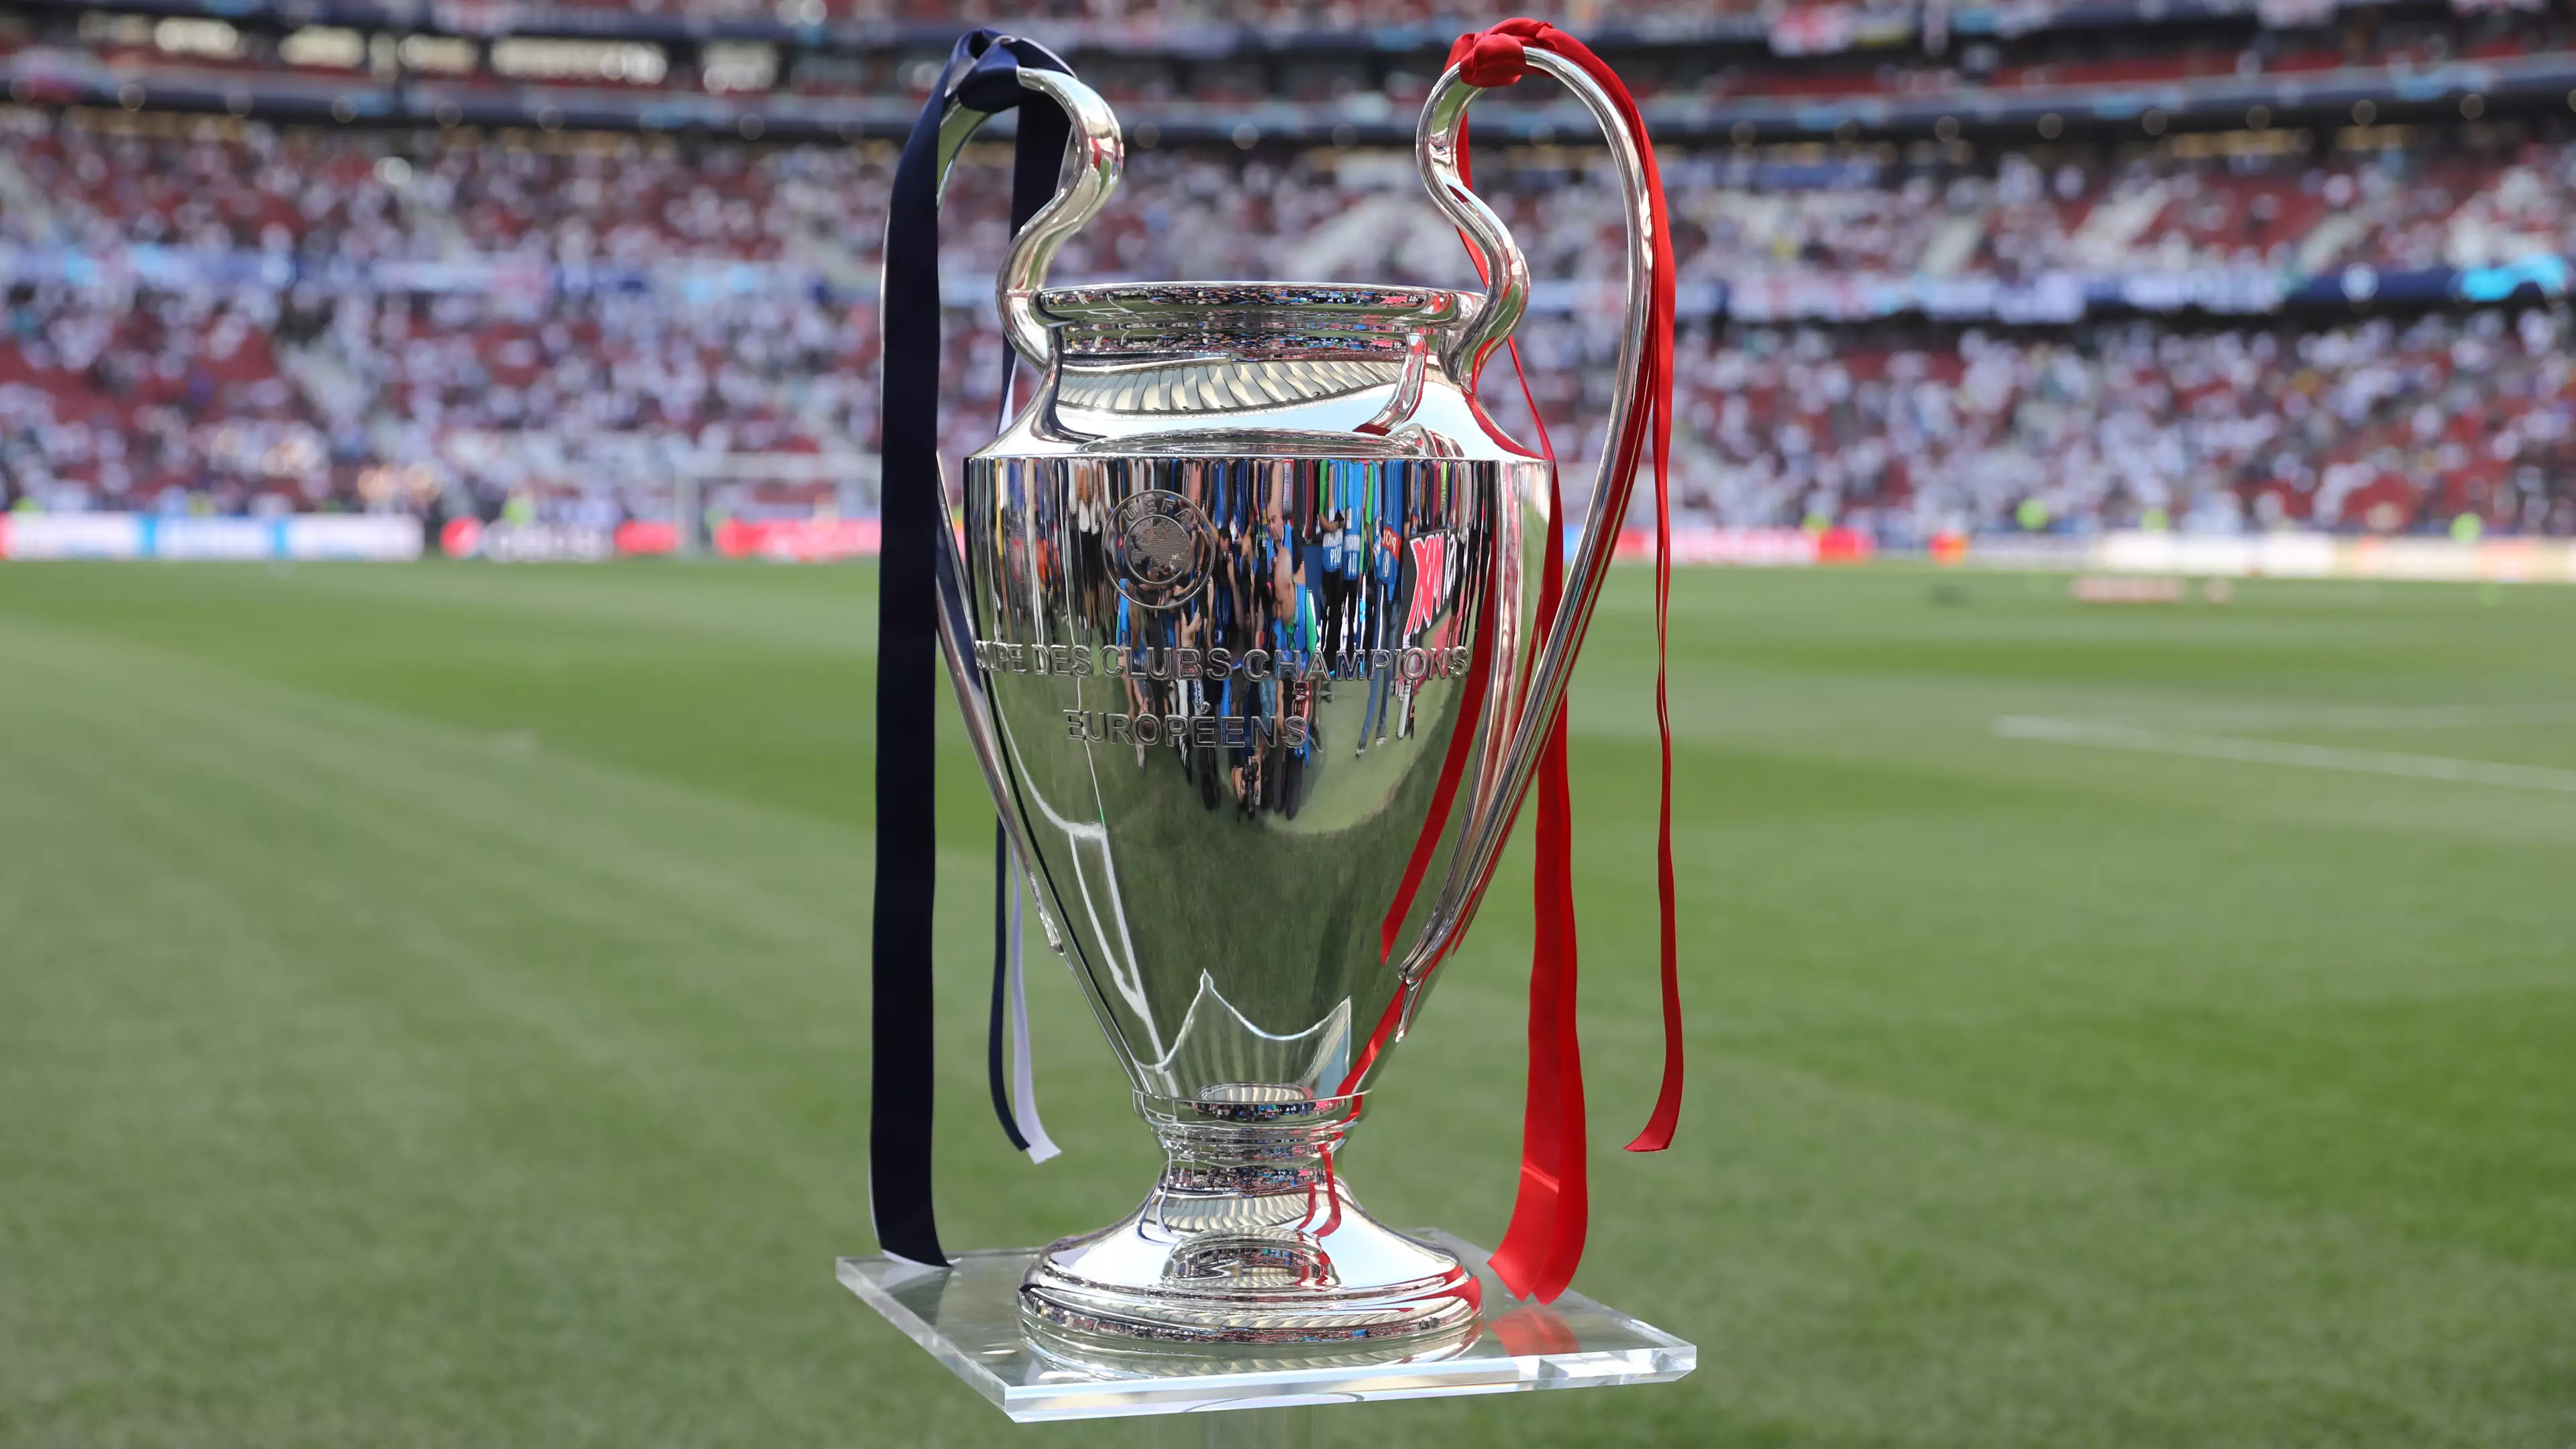 Champions League Group Stage Draw: When Is It On? What Are The Pots/Seedings?